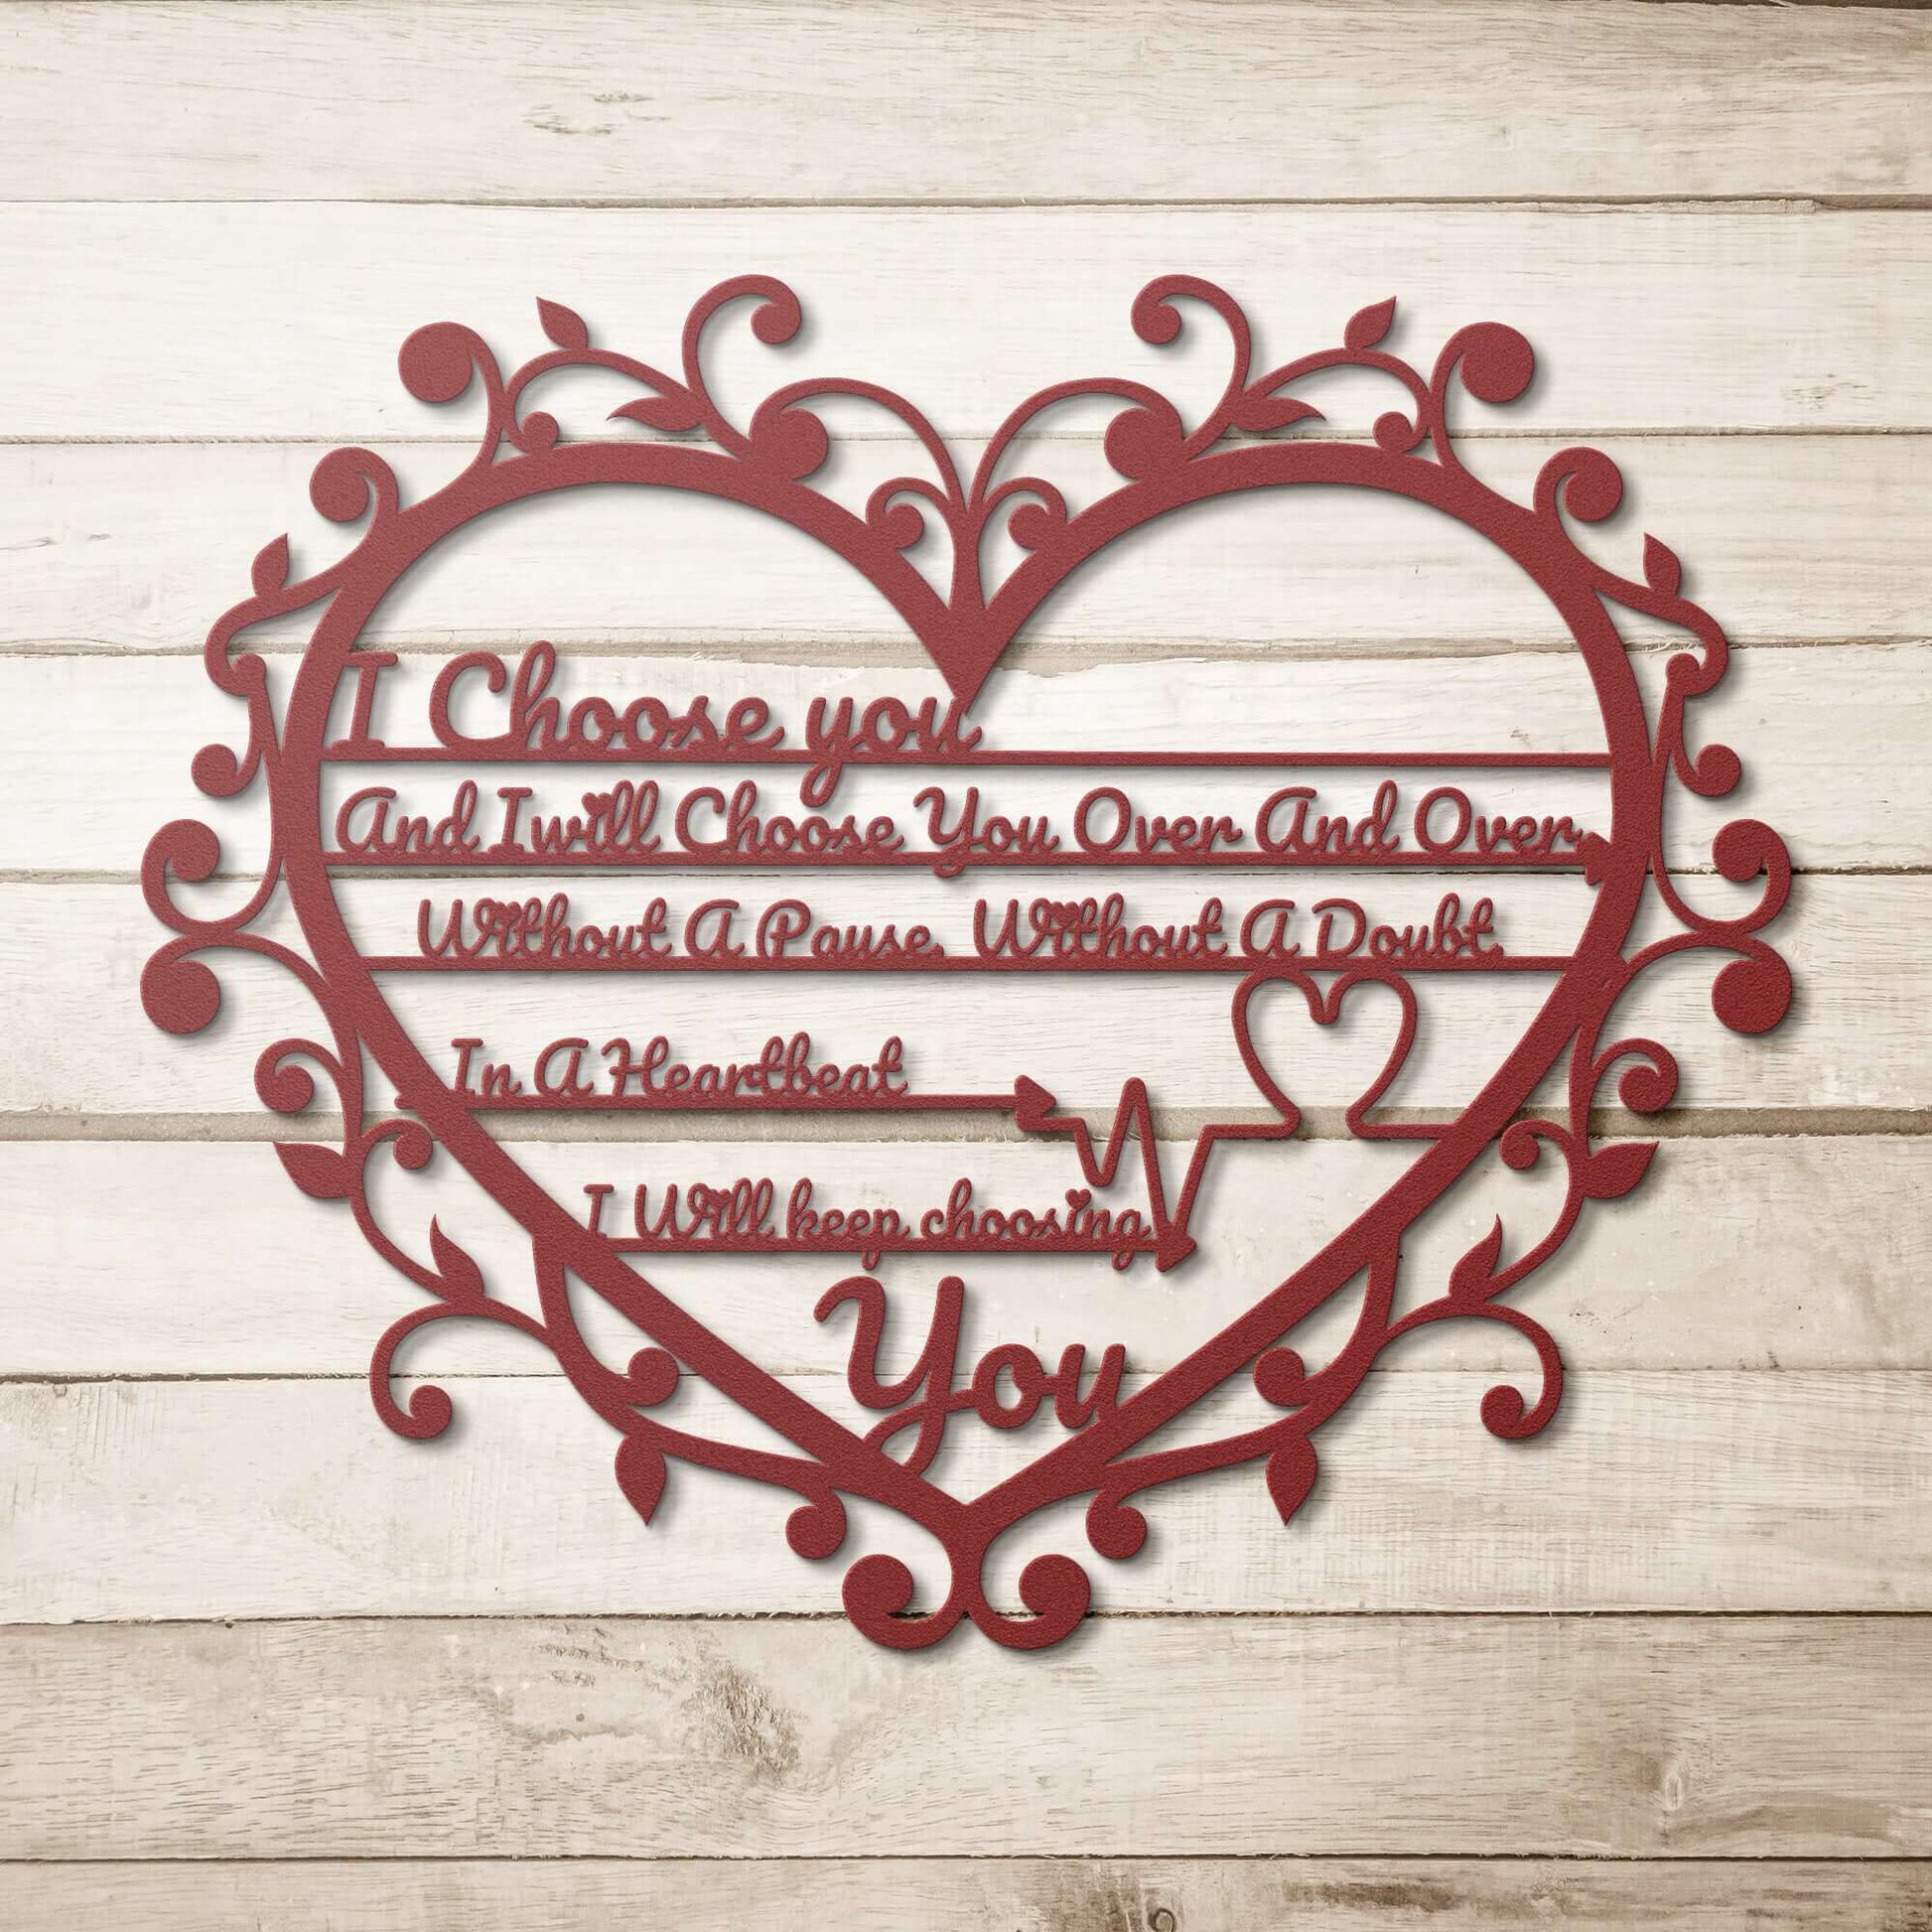 I choose you and I will keep choosing you heart metal wall art, Bedroom wall decor, Gift For Couple, Wedding Gift, Metal Signs - Always Essential Gifts